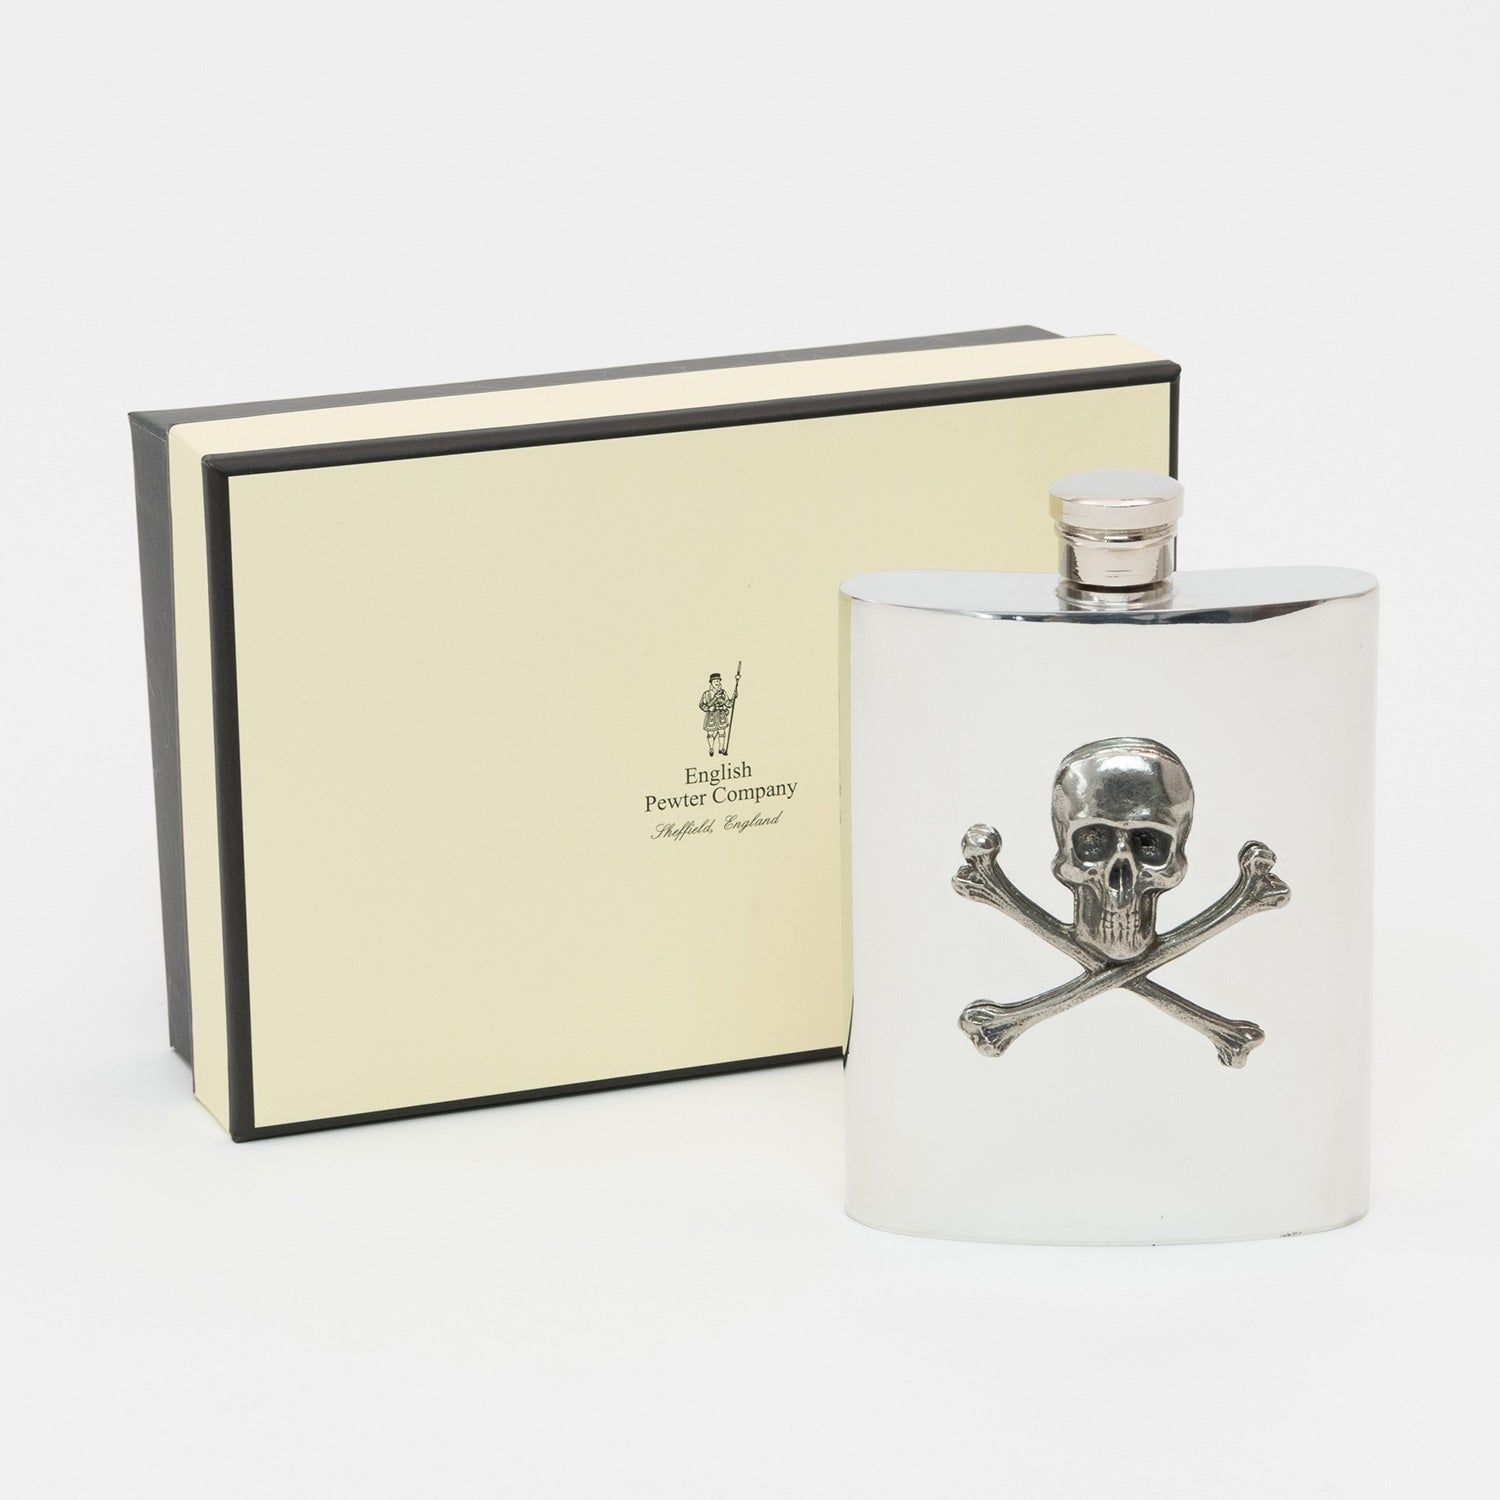 A silver hip flask with a skull and cross bones detail. The hip flask is displayed in front of the presentation gift box.